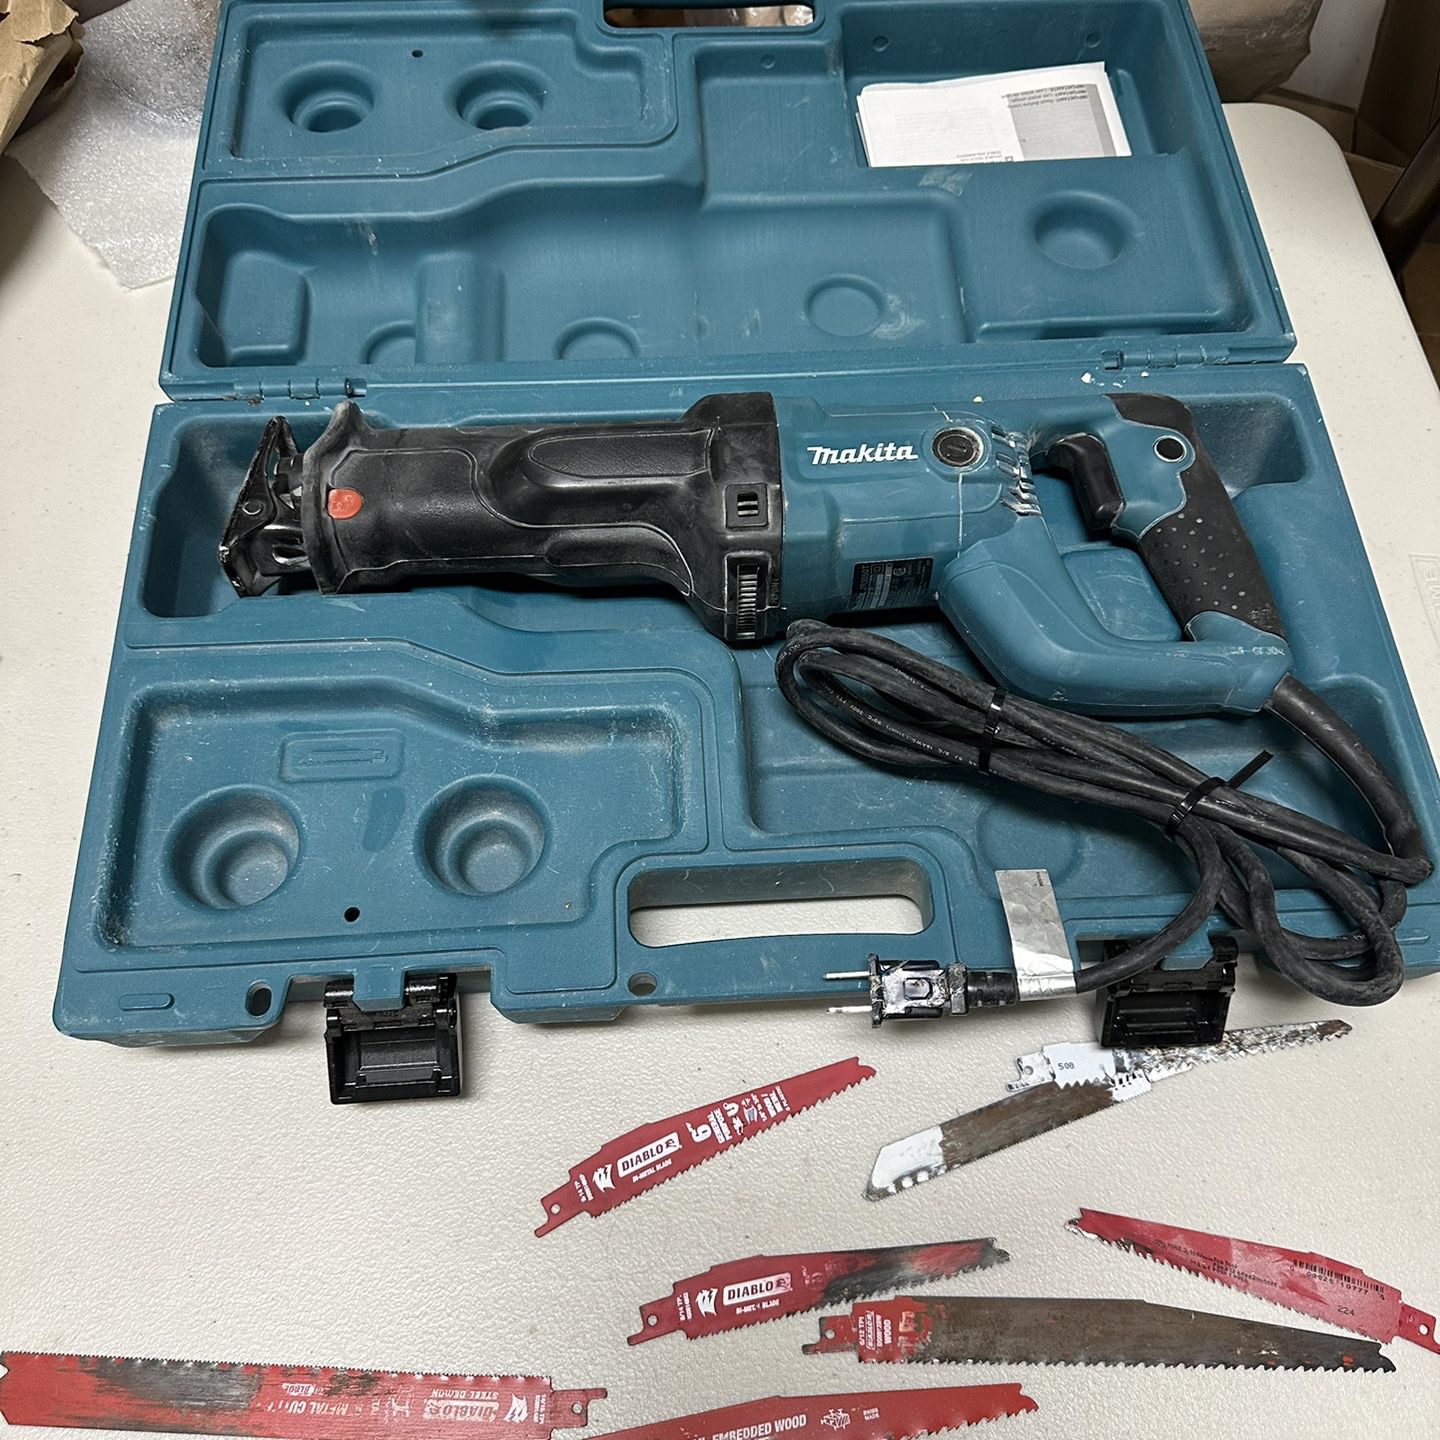 Makita 1 1/8” Reciprocating Amp for in Seymour, CT - OfferUp